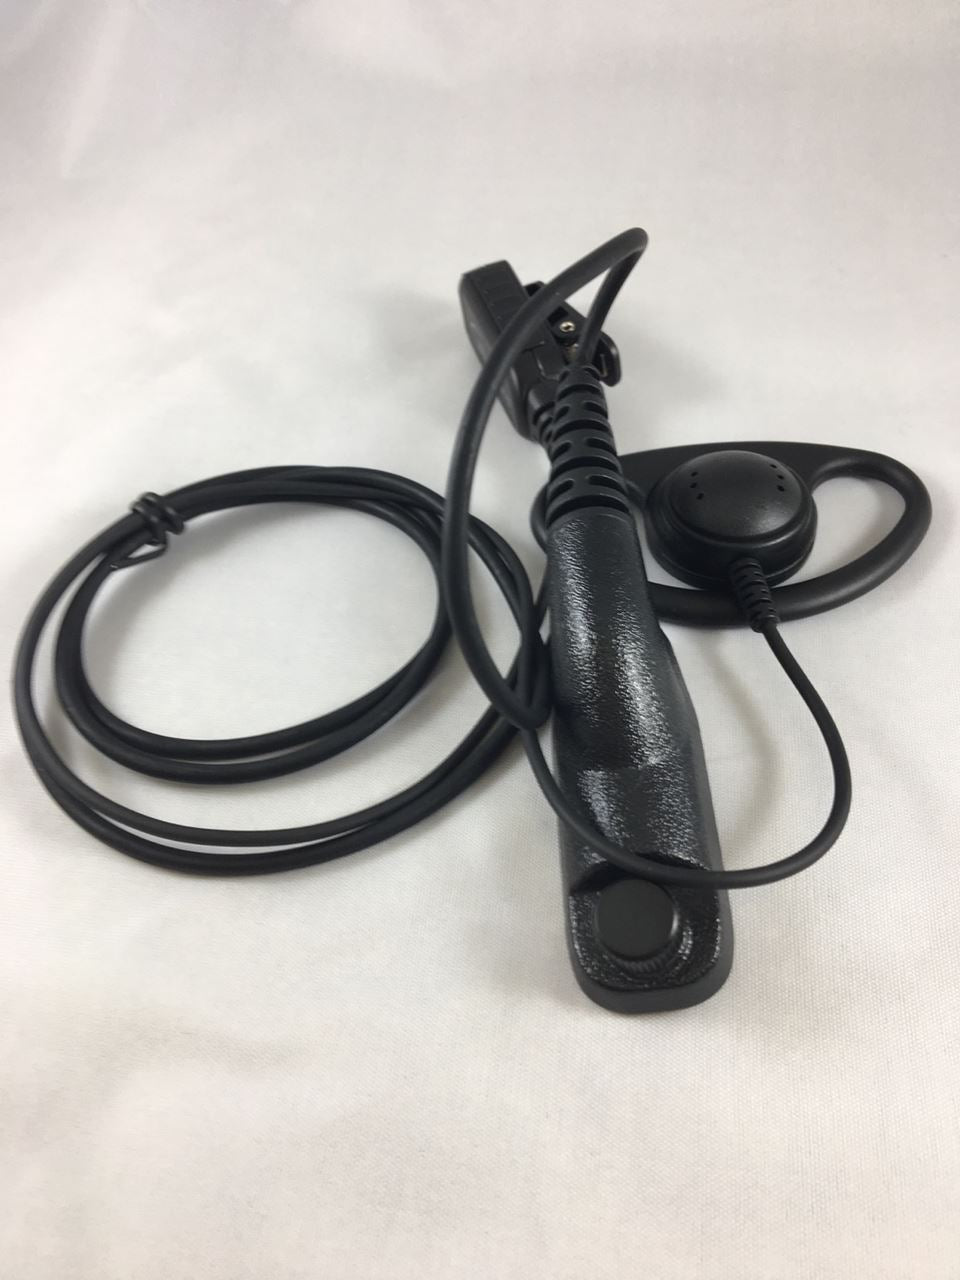 WC-Dhang-M11 2-Wire Kit with PTT and D-shape Receive Only Piece for Motorola Turbo XPR & APX radios - Waveband Communications